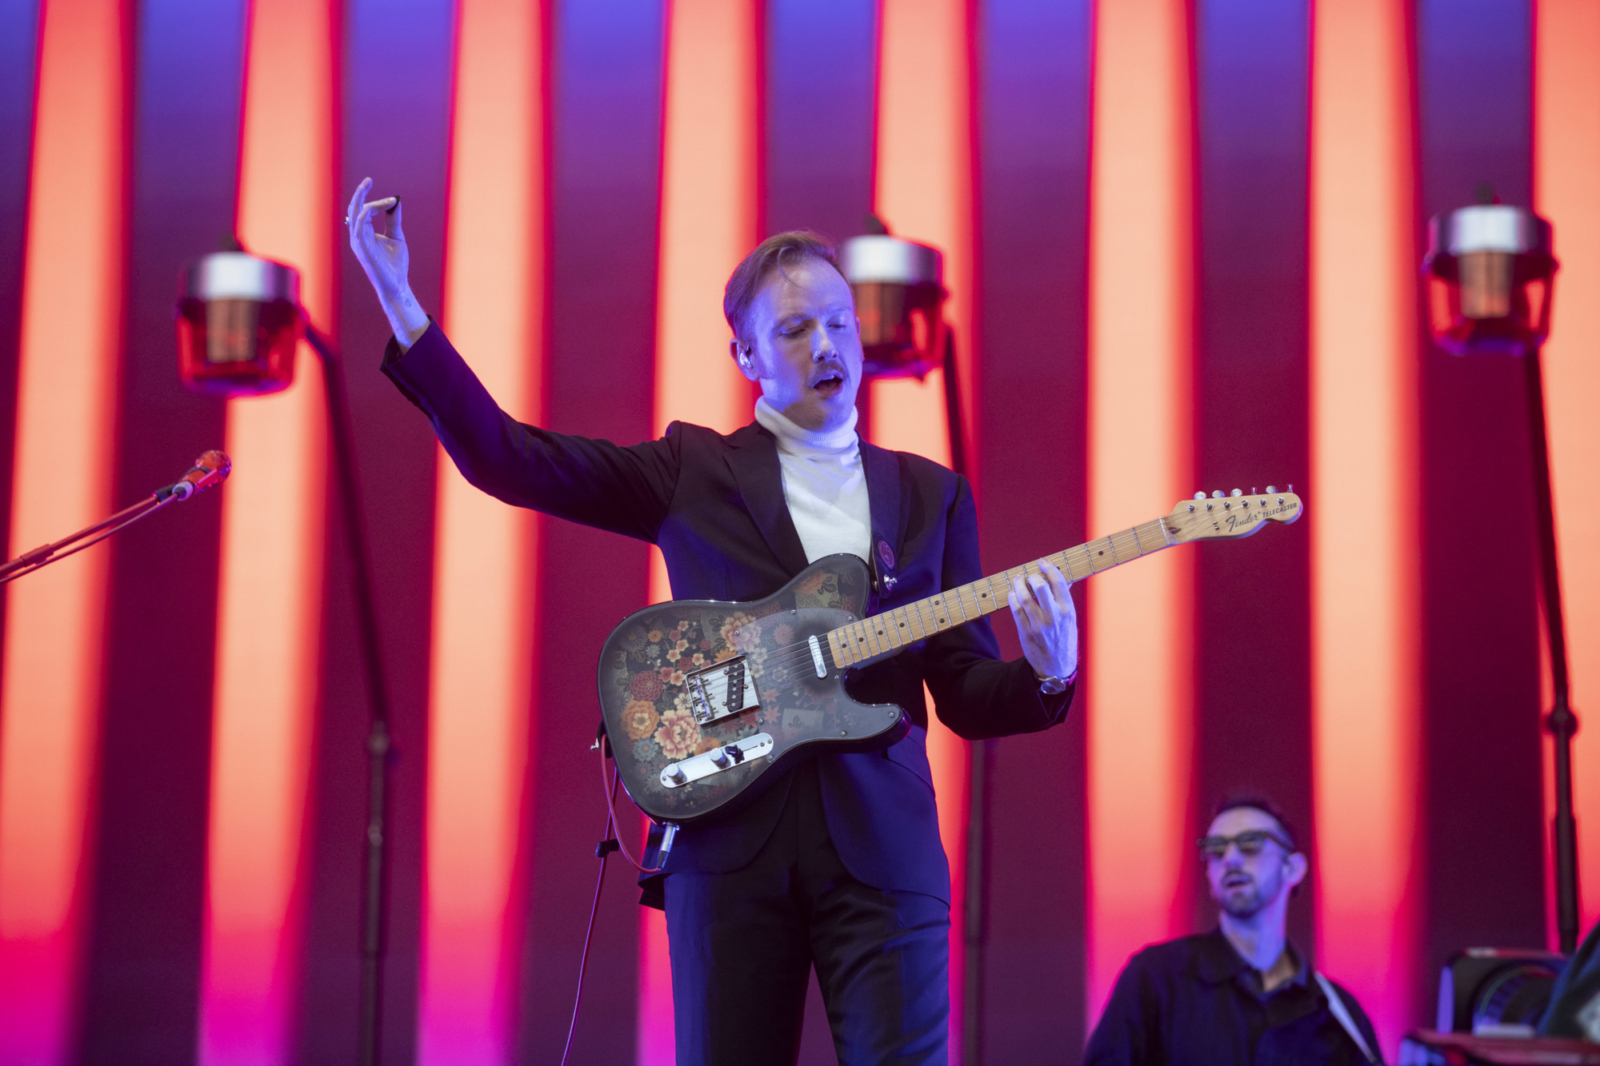 Two Door Cinema Club, The Wombats, Pale Waves and more to play Community festival